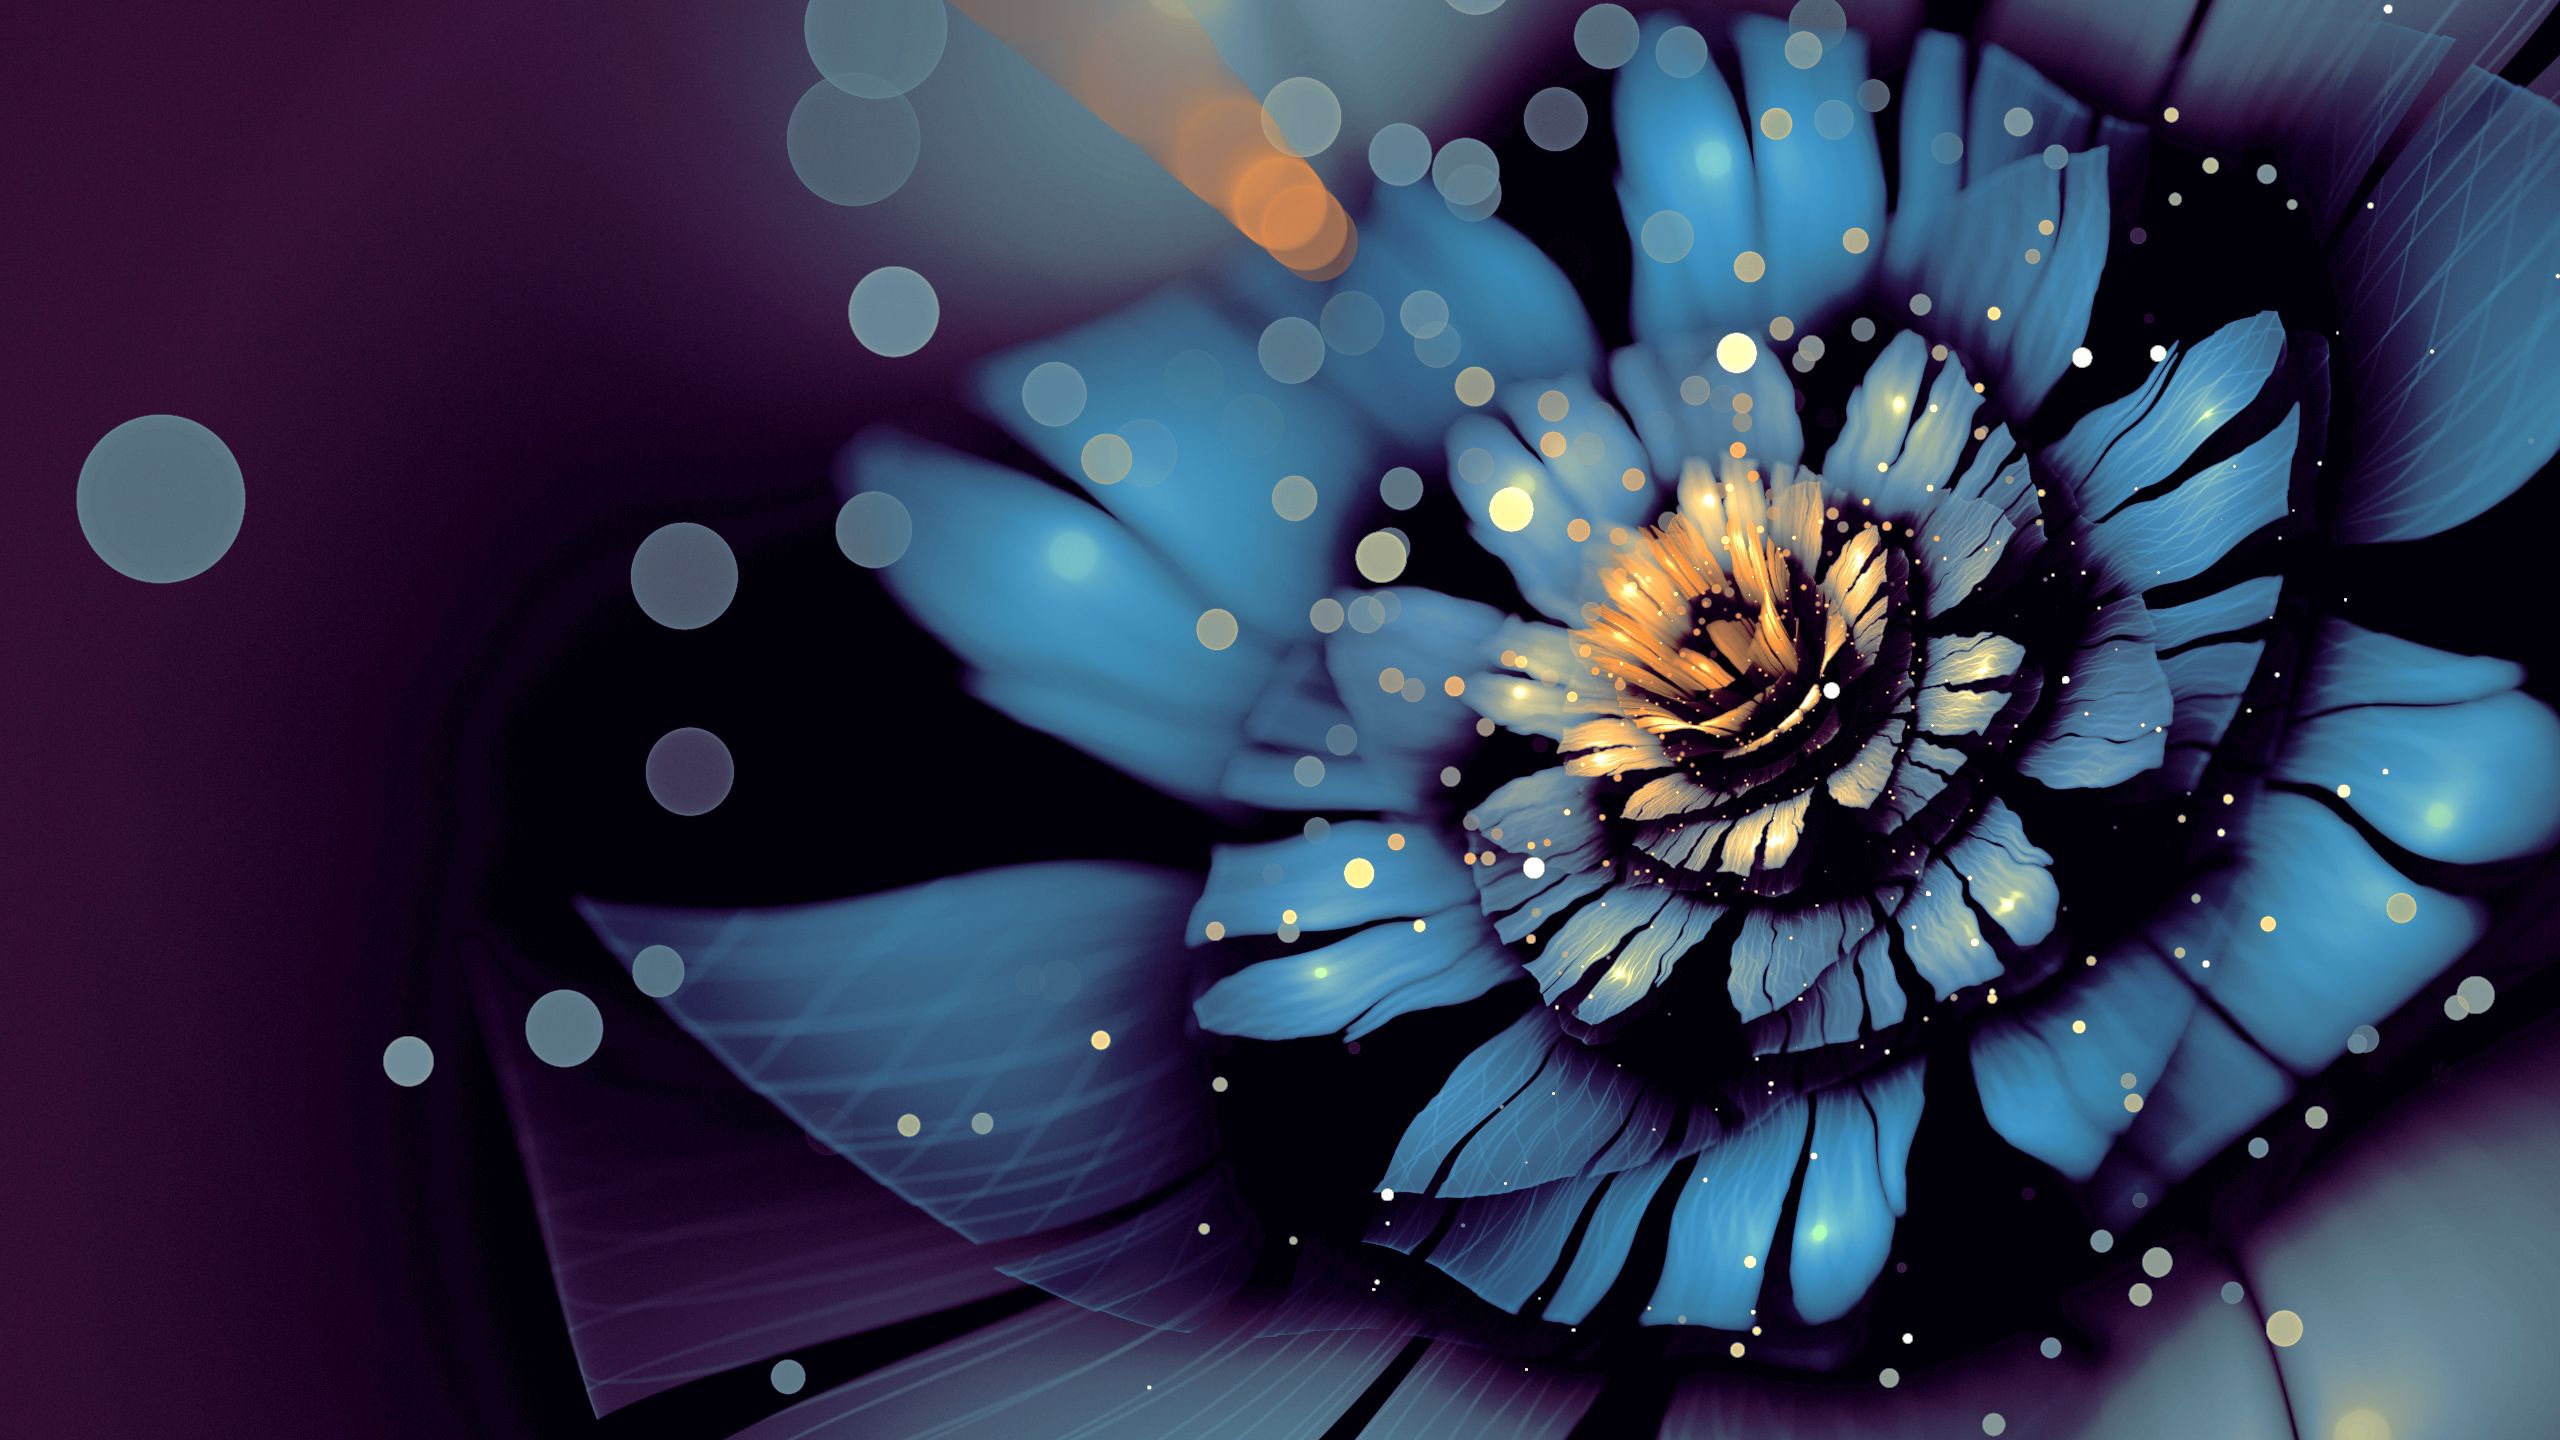 Apophysis Bloom Flower Digital Art 720P HD 4k Wallpaper, Image, Background, Photo and Picture